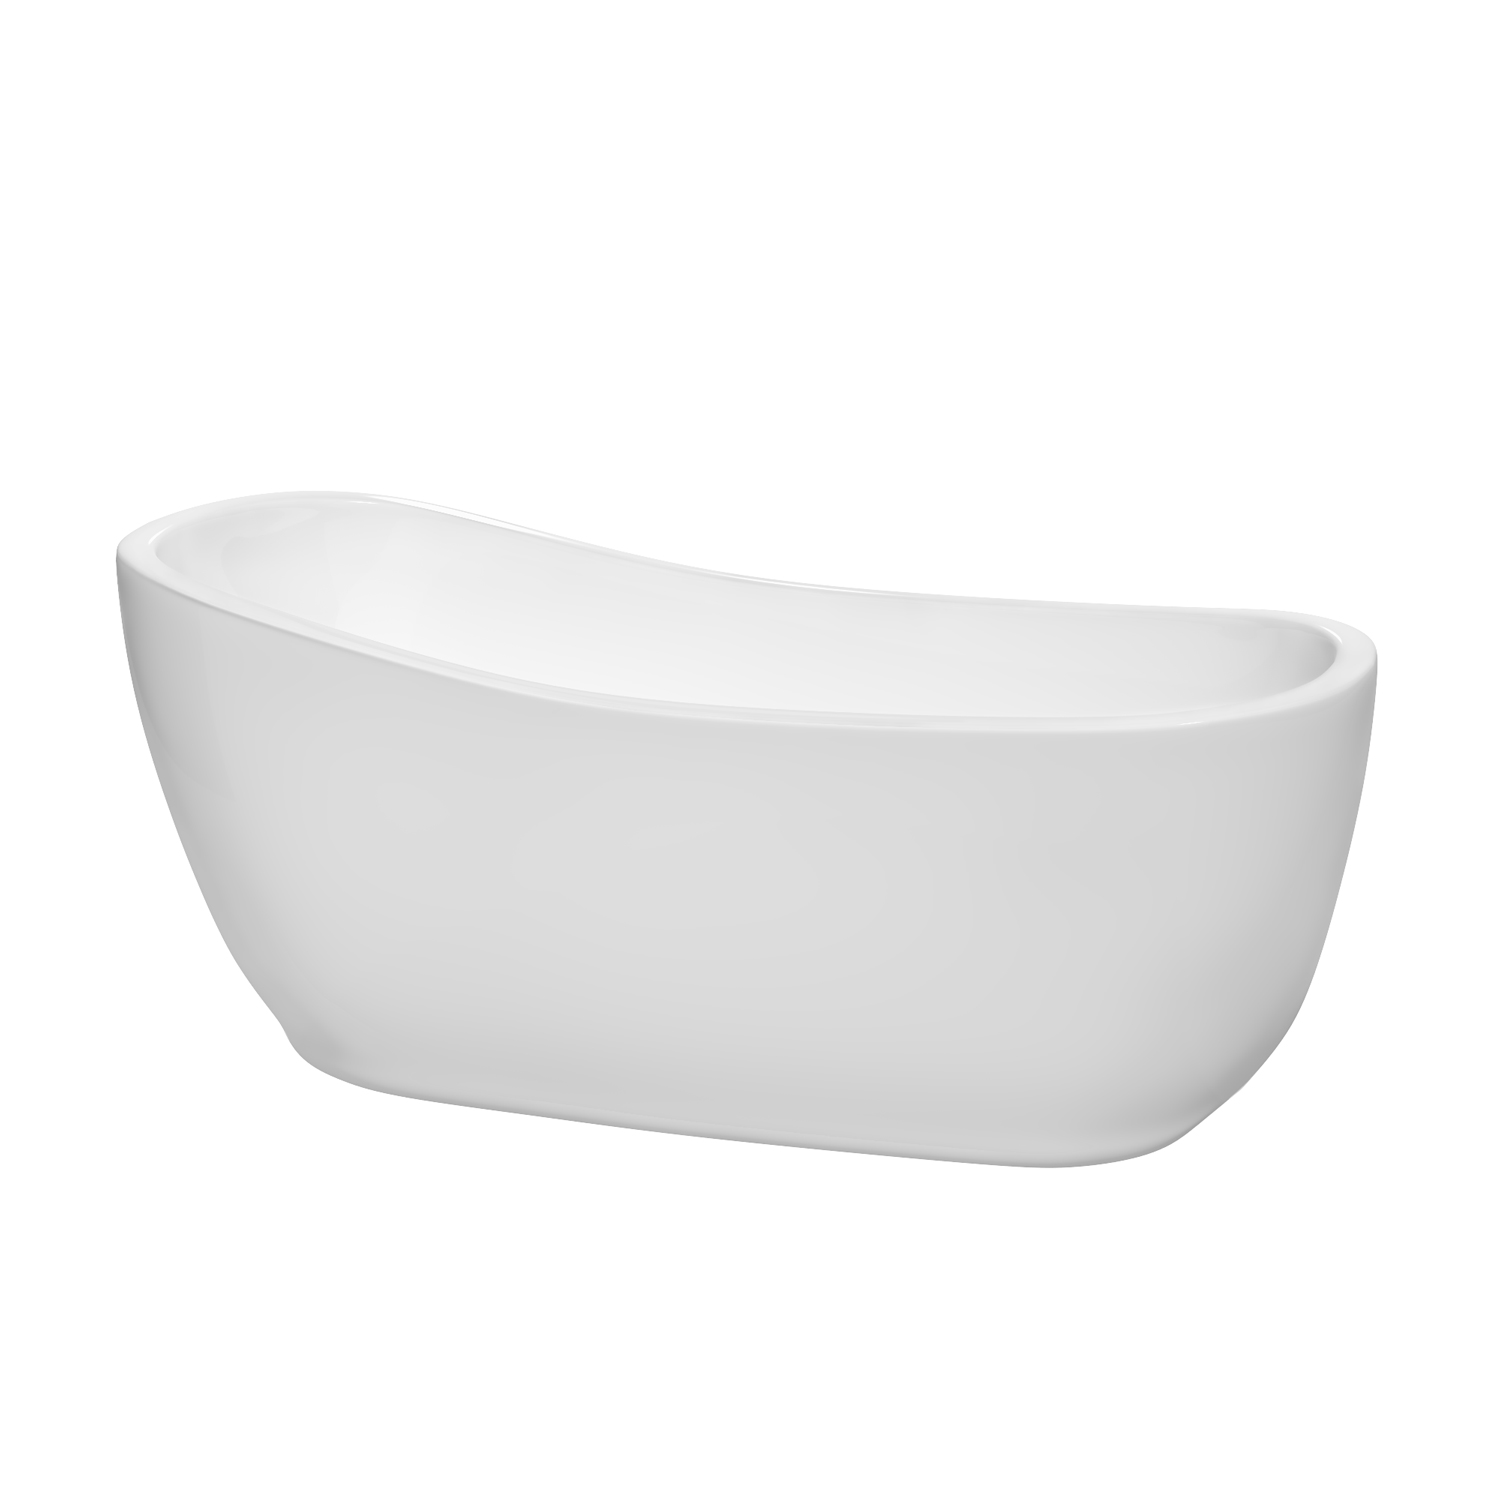 66" Freestanding Bathtub in White with Matte Black Drain and Overflow Trim